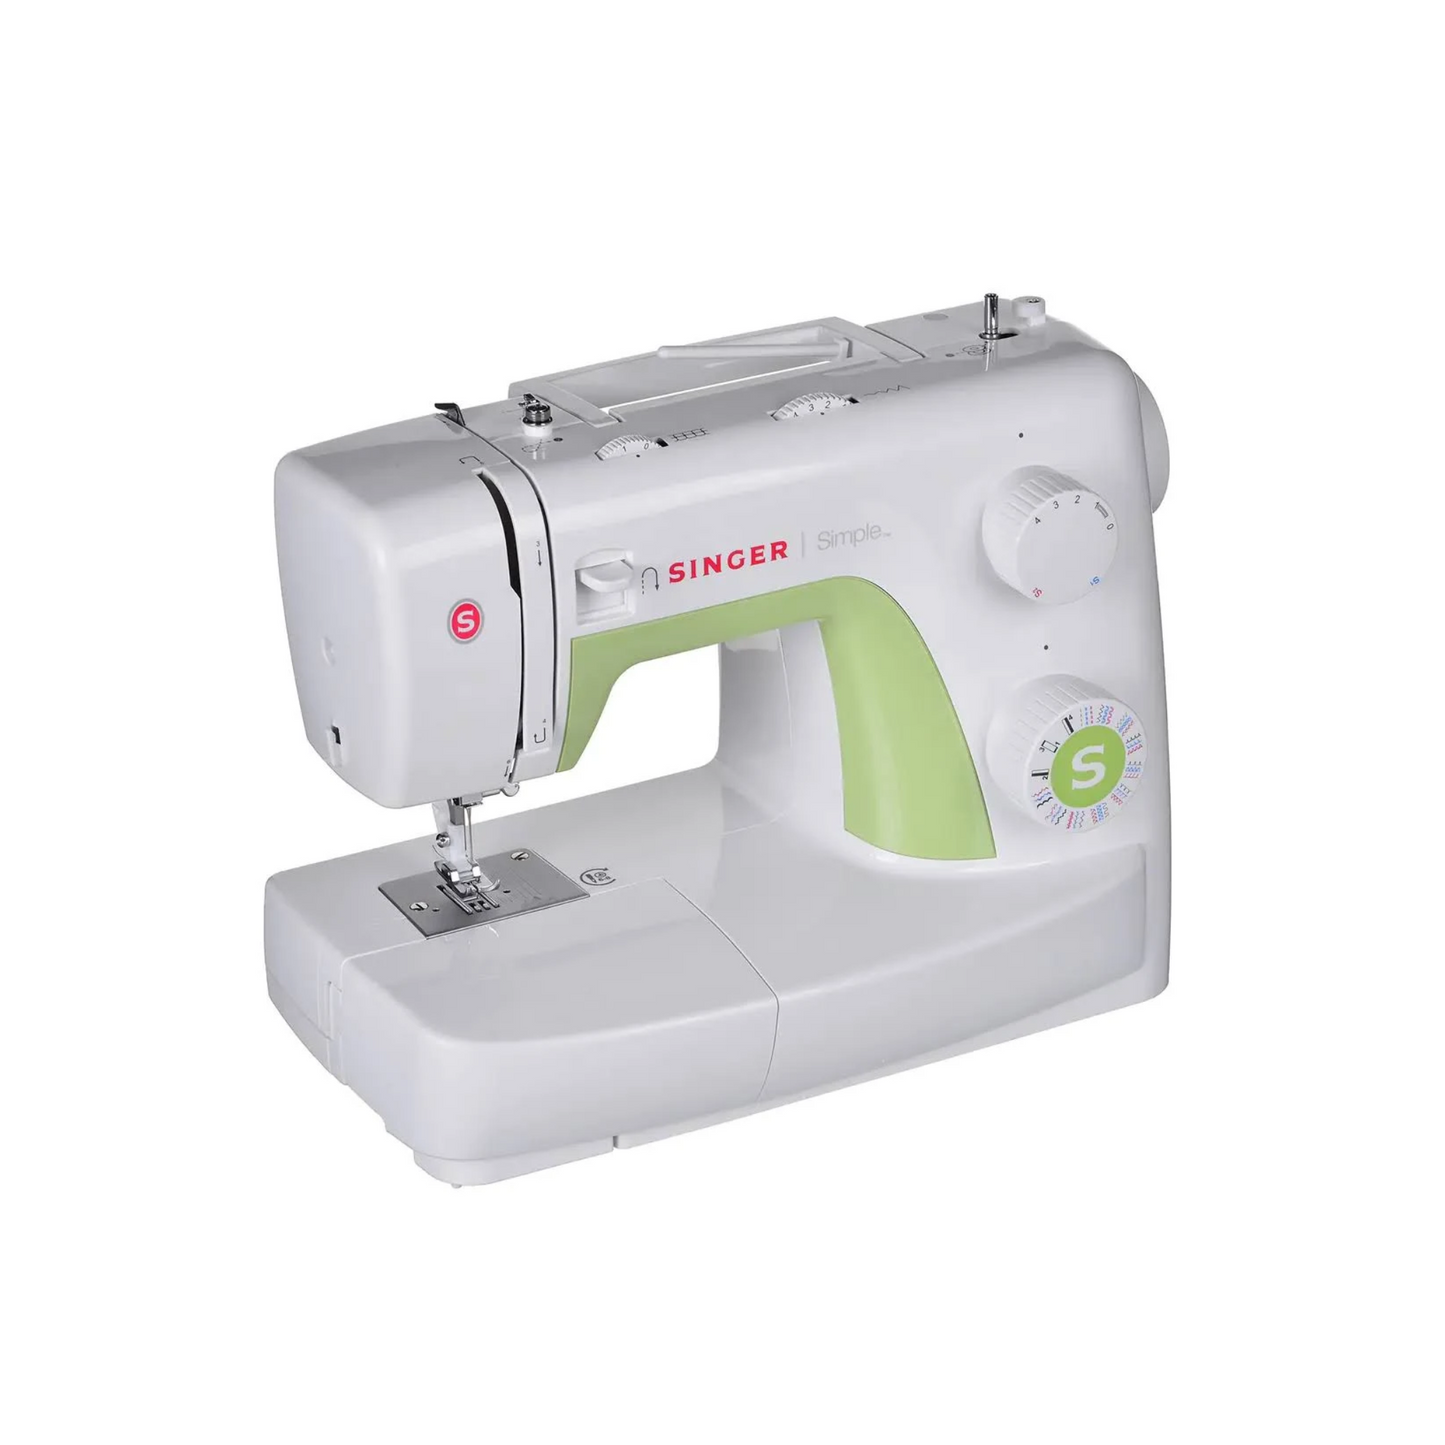 Singer simple 3229 automatic zig-zag electric - Sewing machine - White - green -  Side view